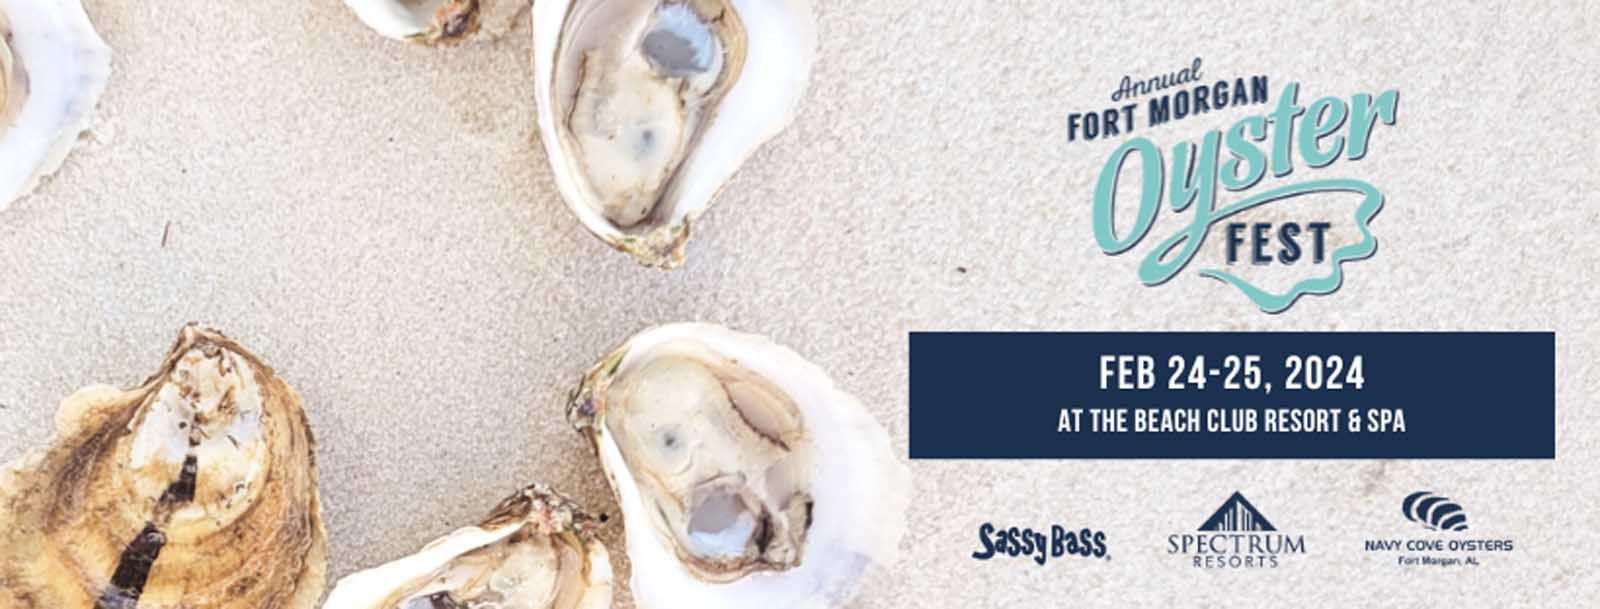 Annual Fort Oyster Fest